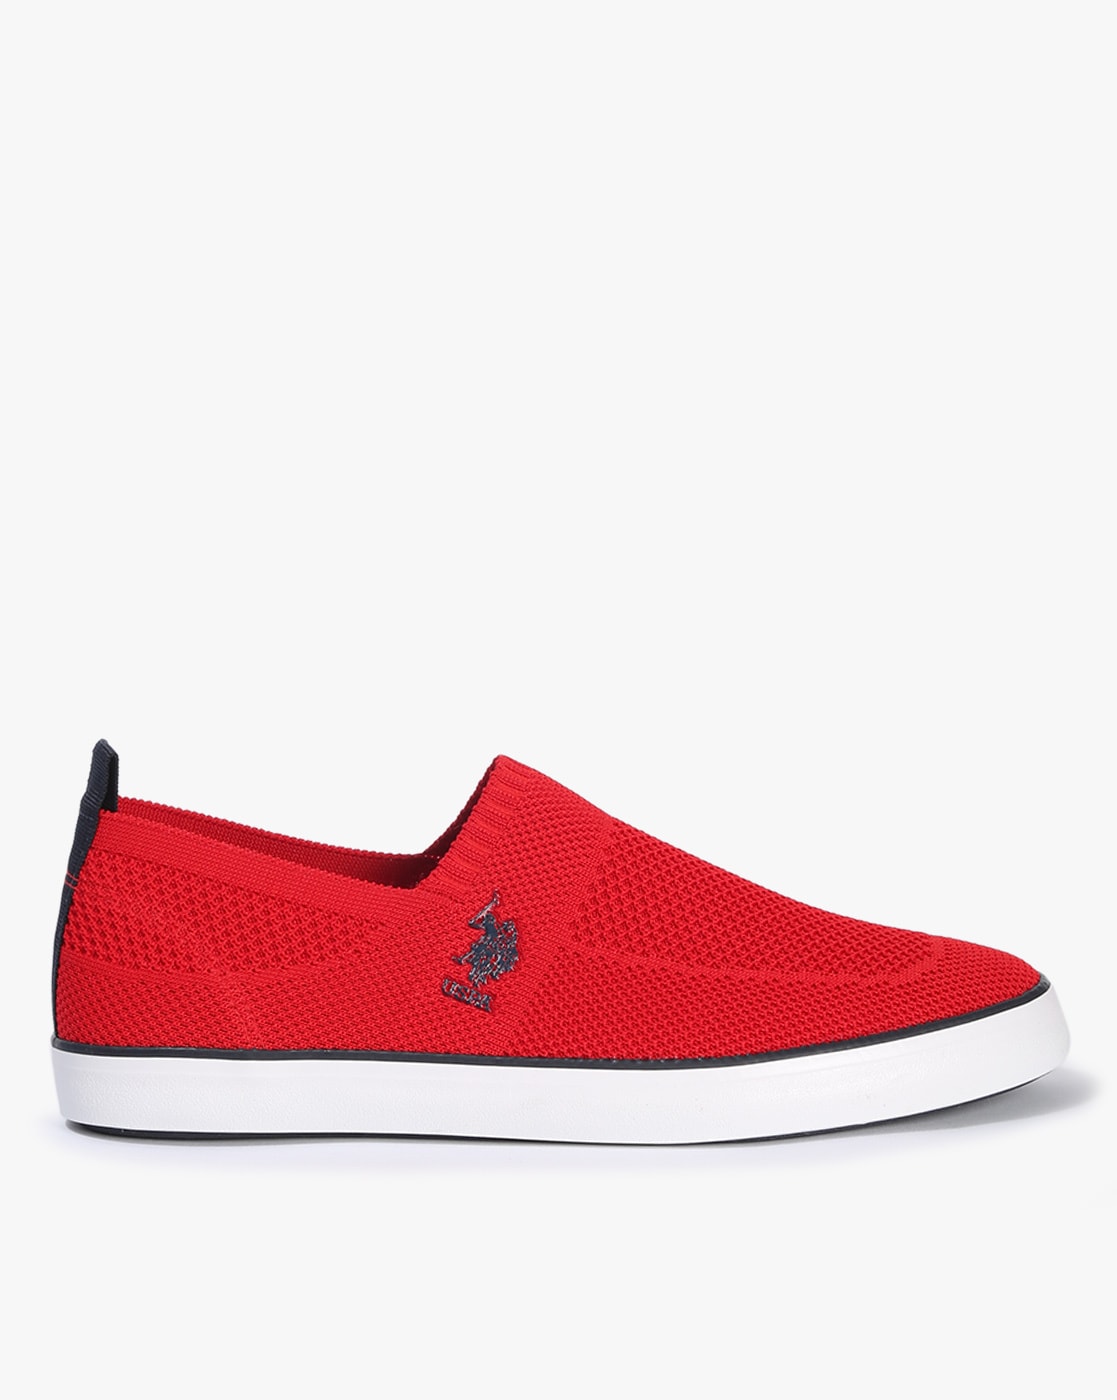 Nwt Polo Ralph Lauren Black/Red P-Wing Sneakers | Unique Style